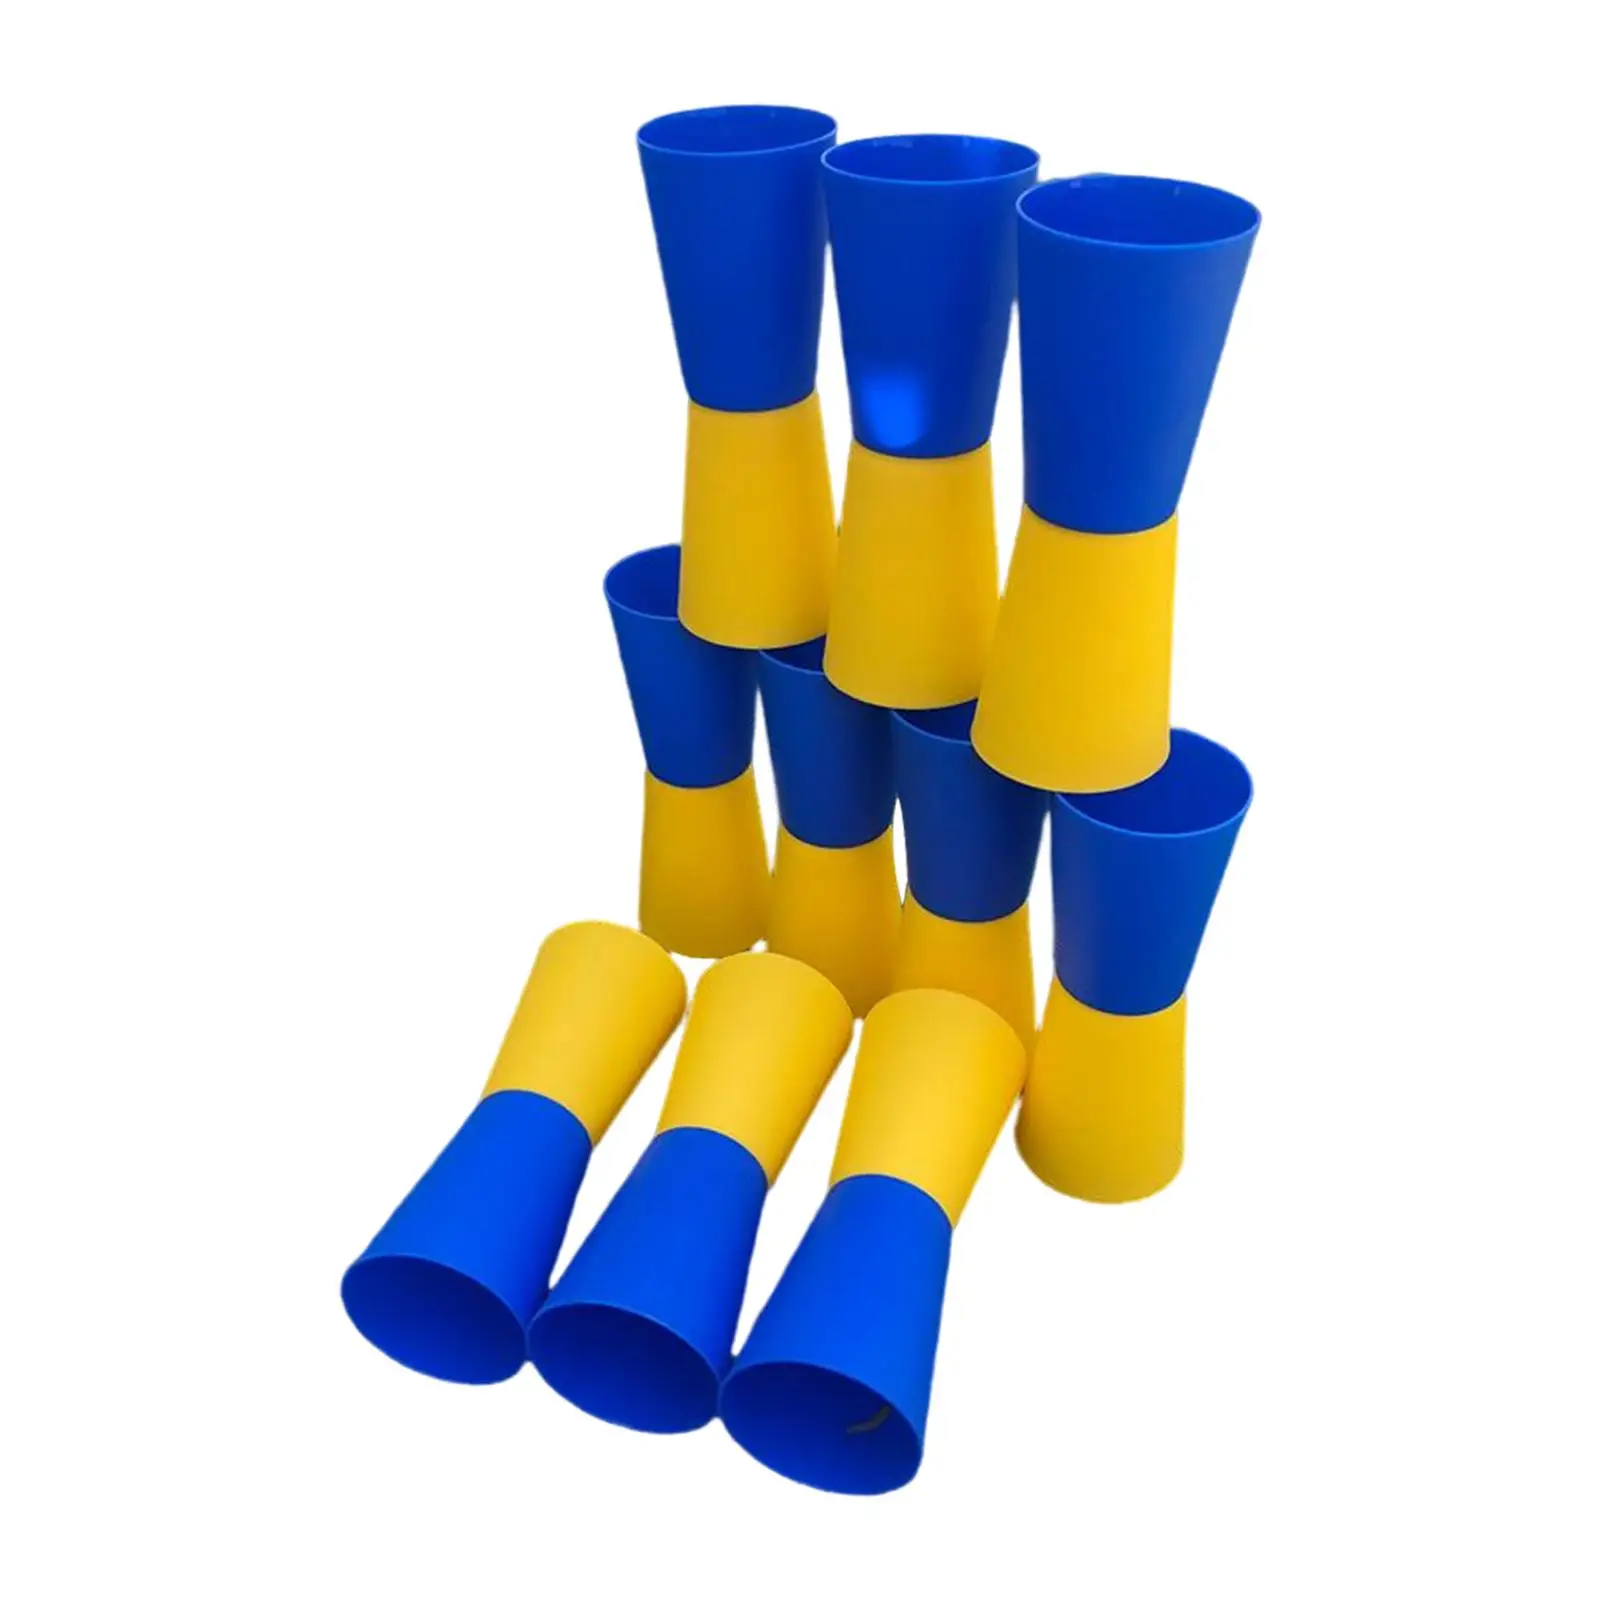 10Pcs Flip Cups Speed Agility Training Sport Equipment Sensory Integration Aid Reversed Cups for Football Gym Rugby Basketball